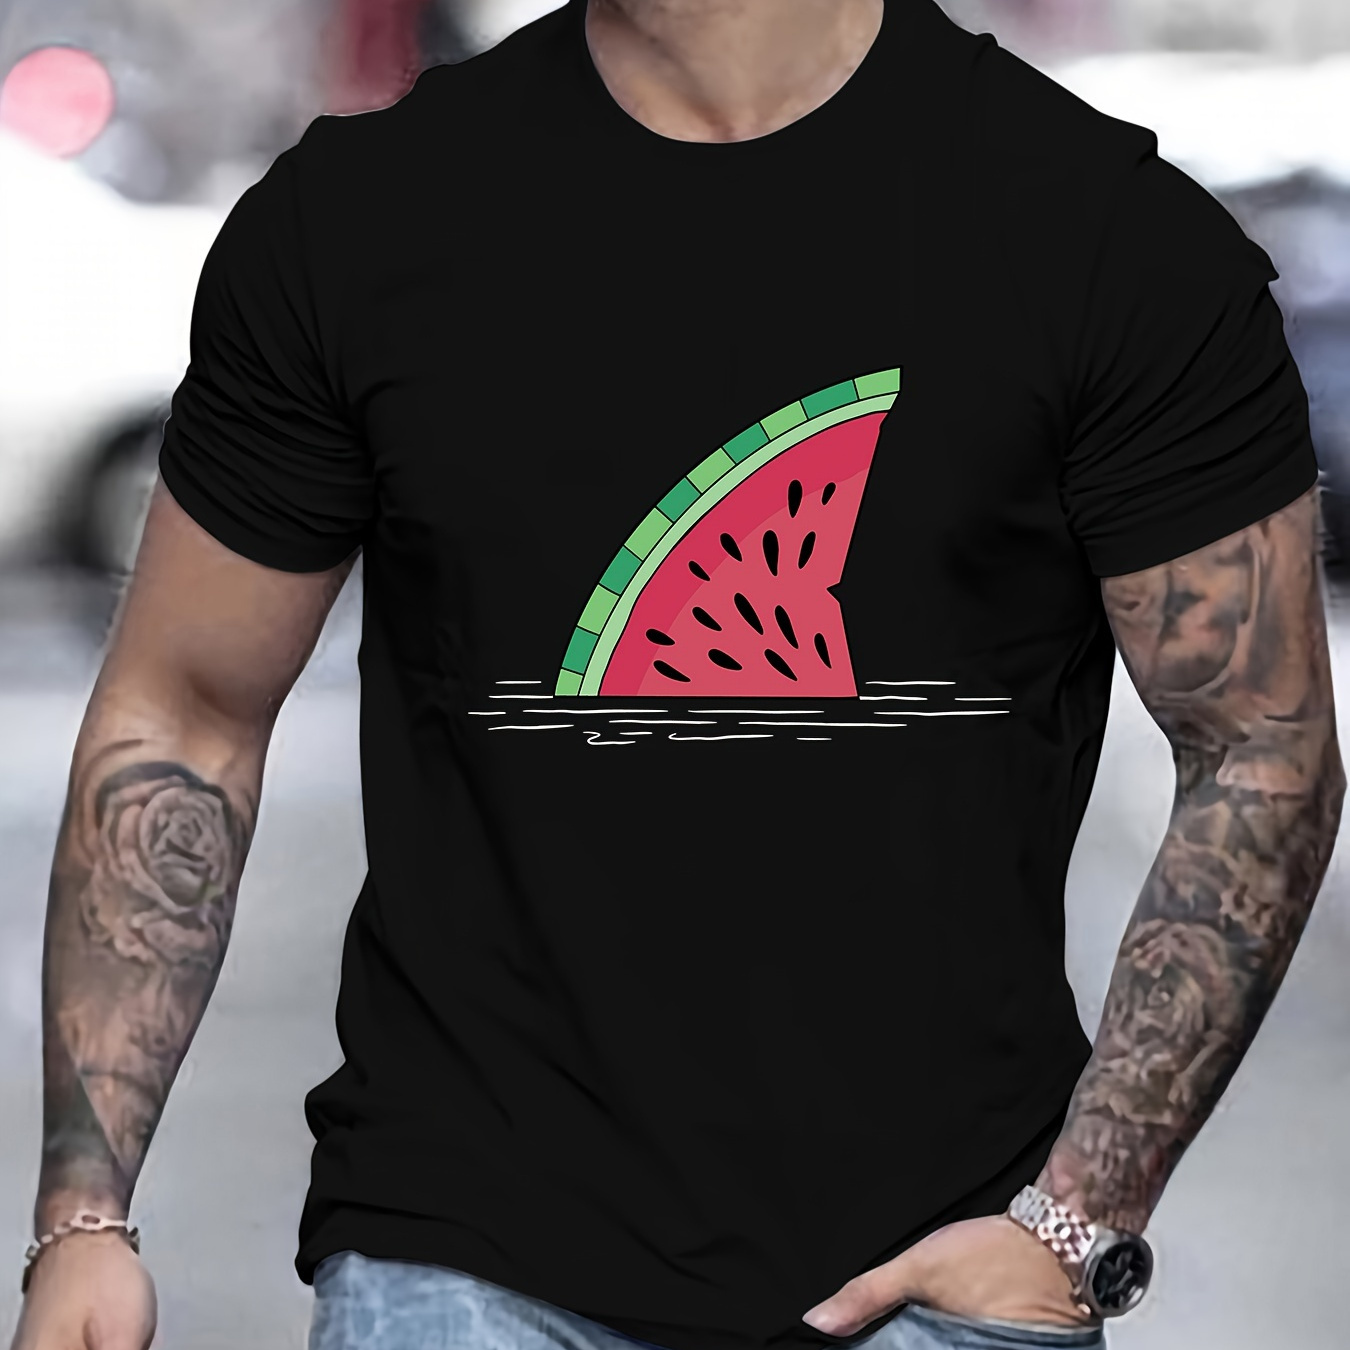 

Men's Casual Short-sleeved T-shirt, Spring And Summer Watermelon Creative Print Top, Comfortable Round Neck Tee, Regular Fit, Versatile Fashion For Everyday Wear